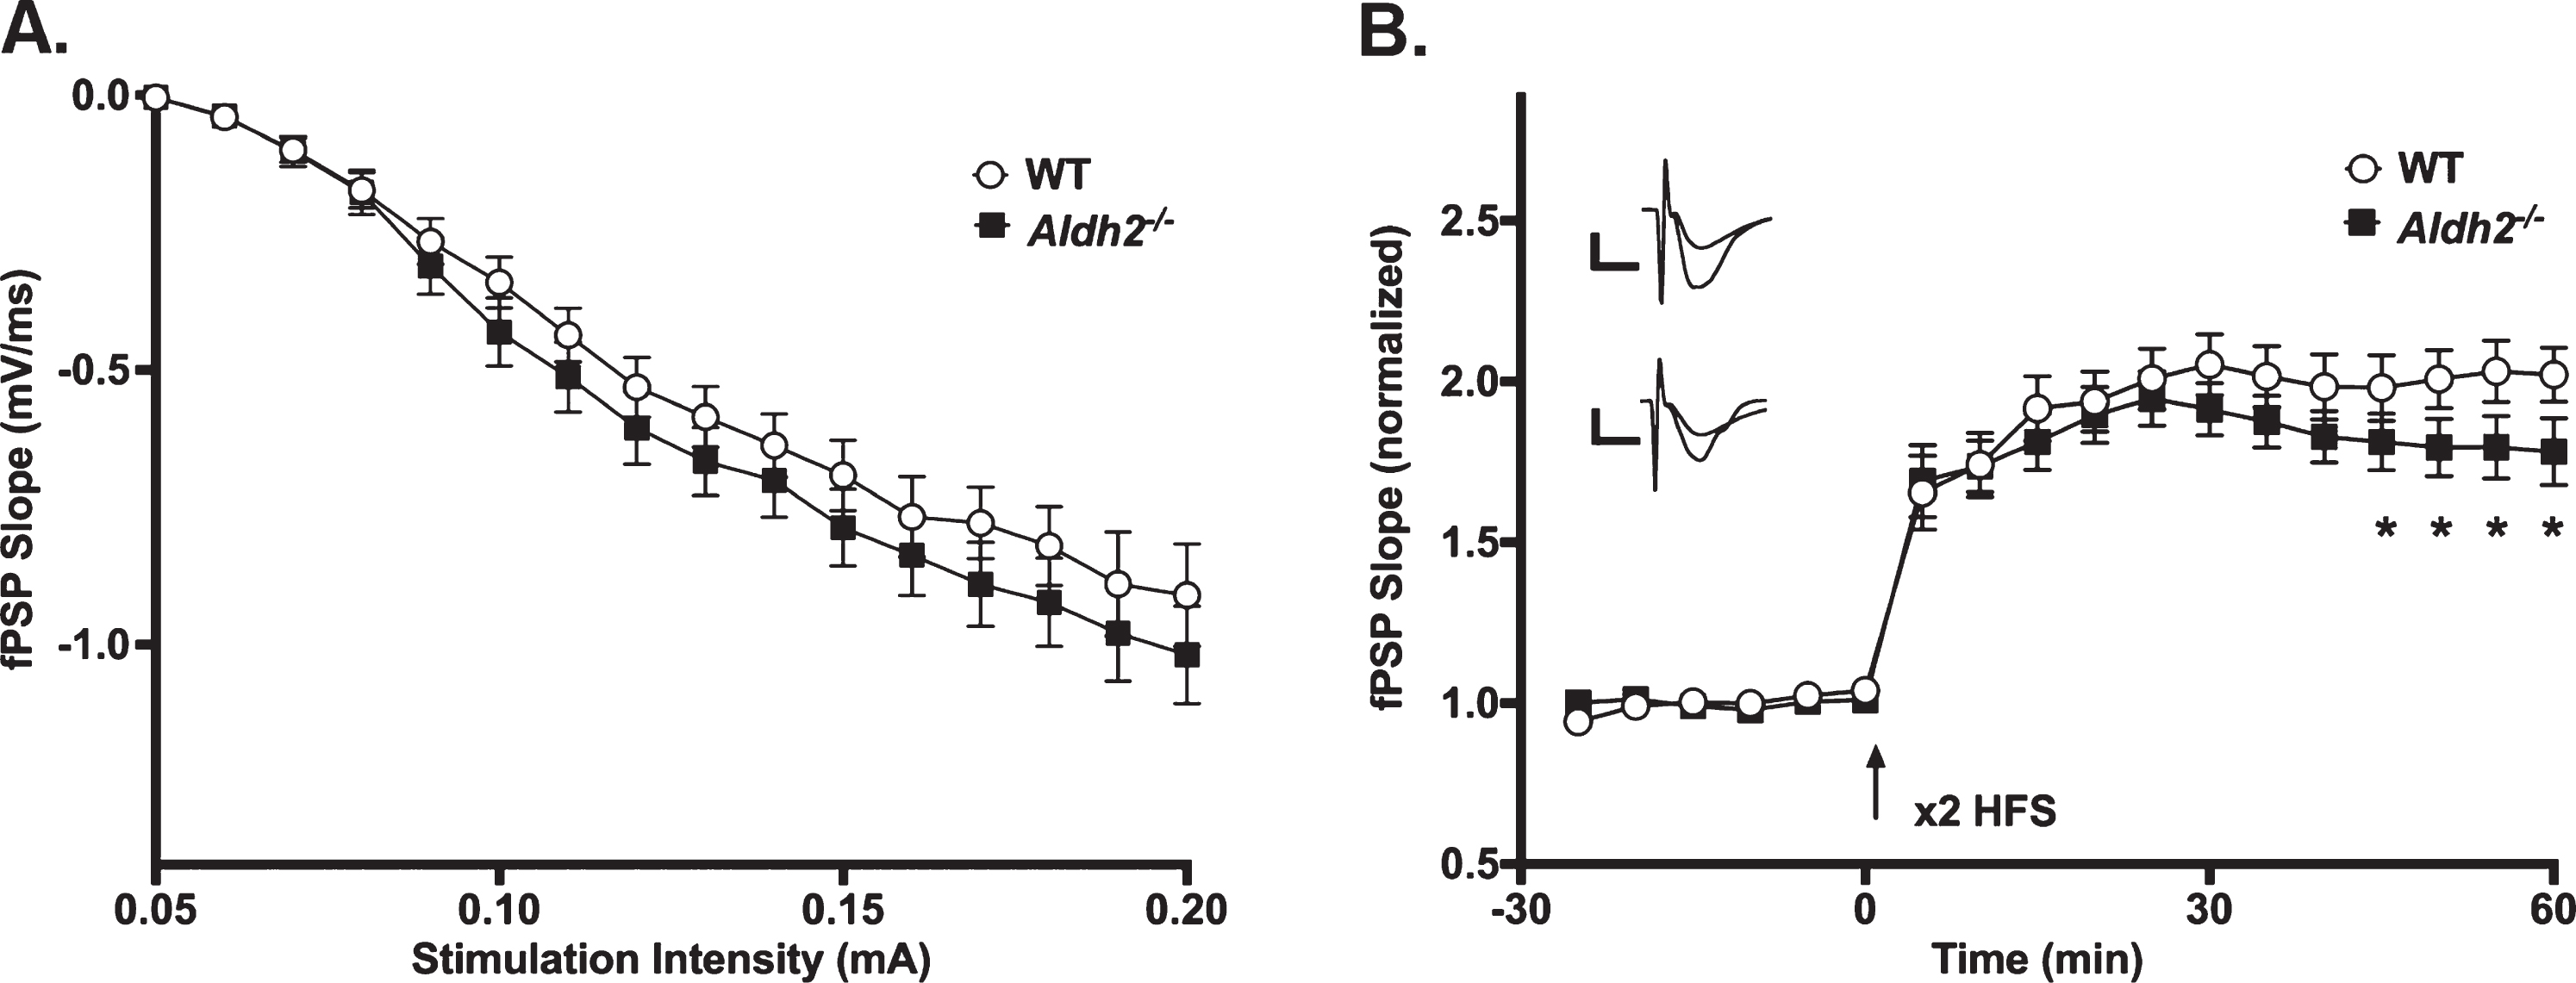 LTP Outcomes. A) I/O curves for fPSP slopes (mV/ms; mean±SEM) elicited in CA1 by single pulse stimulation of the SC in WT and Aldh2–/– mice. The fPSP slope increased with higher stimulation intensities, but no statistical differences between the two groups were detected (p > 0.05). B) fPSP slope (mV/ms; mean±SEM; normalized to baseline) before and after HFS (arrow) in WT and Aldh2–/– mice. Delivery of HFS reliably increased the fPSP slope; however, no main effect of genotype was detected (p > 0.05). Data reported here were taken from 15 WT and 11 Aldh2–/– mice for LTP induction and 15 WT and 10 Aldh2–/– mice for I/O curves. Analysis of the maintenance phase of LTP (the last 20 min) revealed a significant genotype effect with somewhat reduced potentiation in the Aldh2–/– animals (t = 16.84, p < 0.0001; unpaired t-test). Asterisks (*) represent significant group fPSP slope differences at specific time points (t-test) at p < 0.05. Insets depict typical fPSP before (smaller downward deflection) and after (larger downward deflection) HFS in WT (top) and Aldh2–/– mice (bottom; calibration is 0.5 mV and 5 ms).